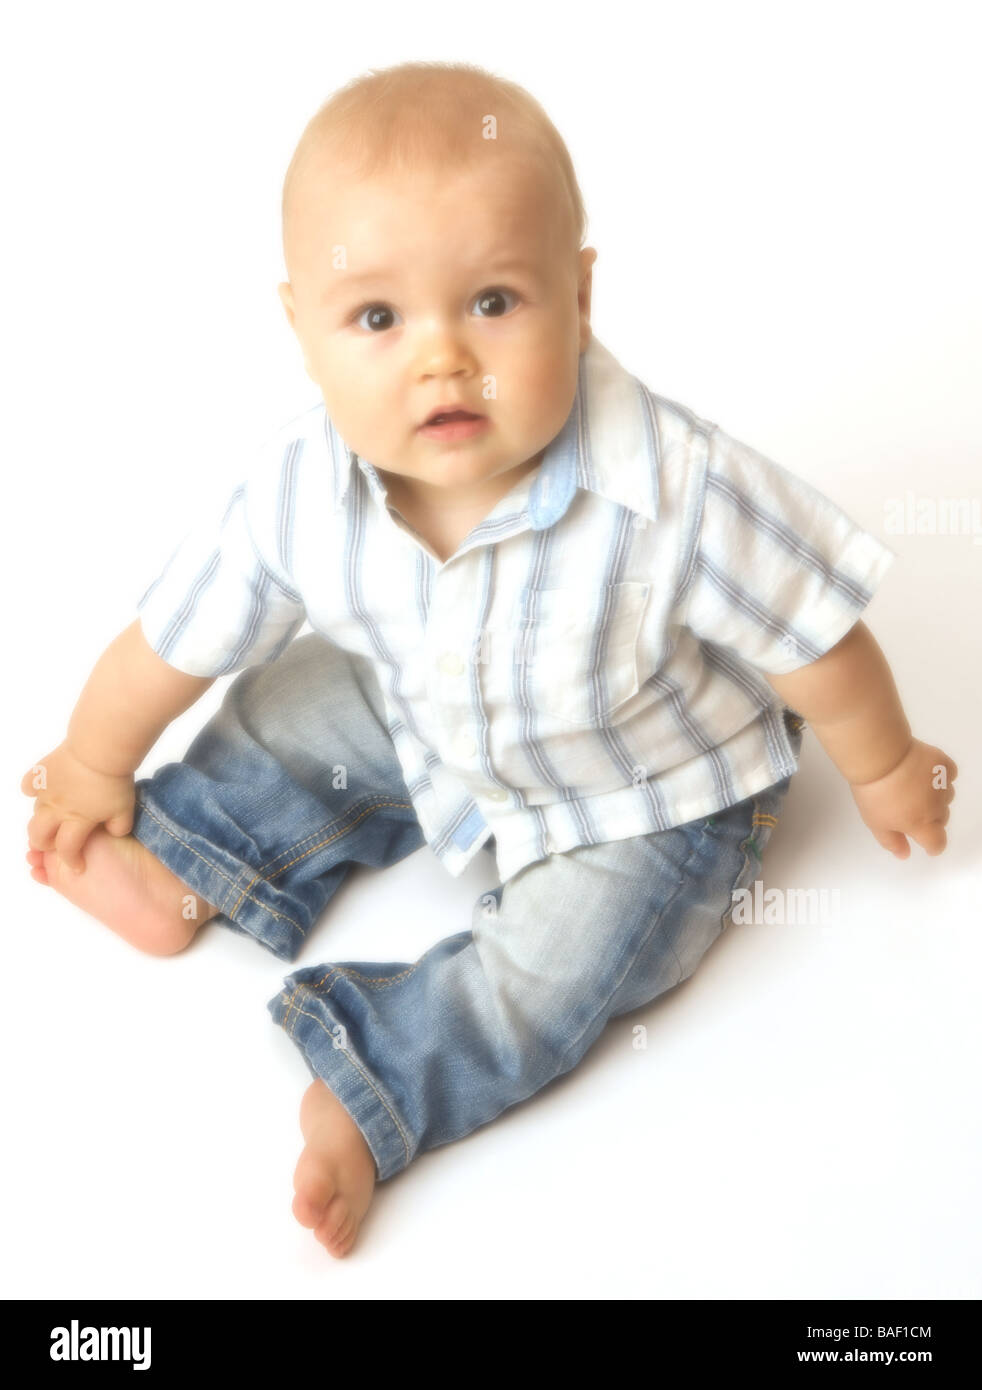 A baby looks up from a white background Stock Photo